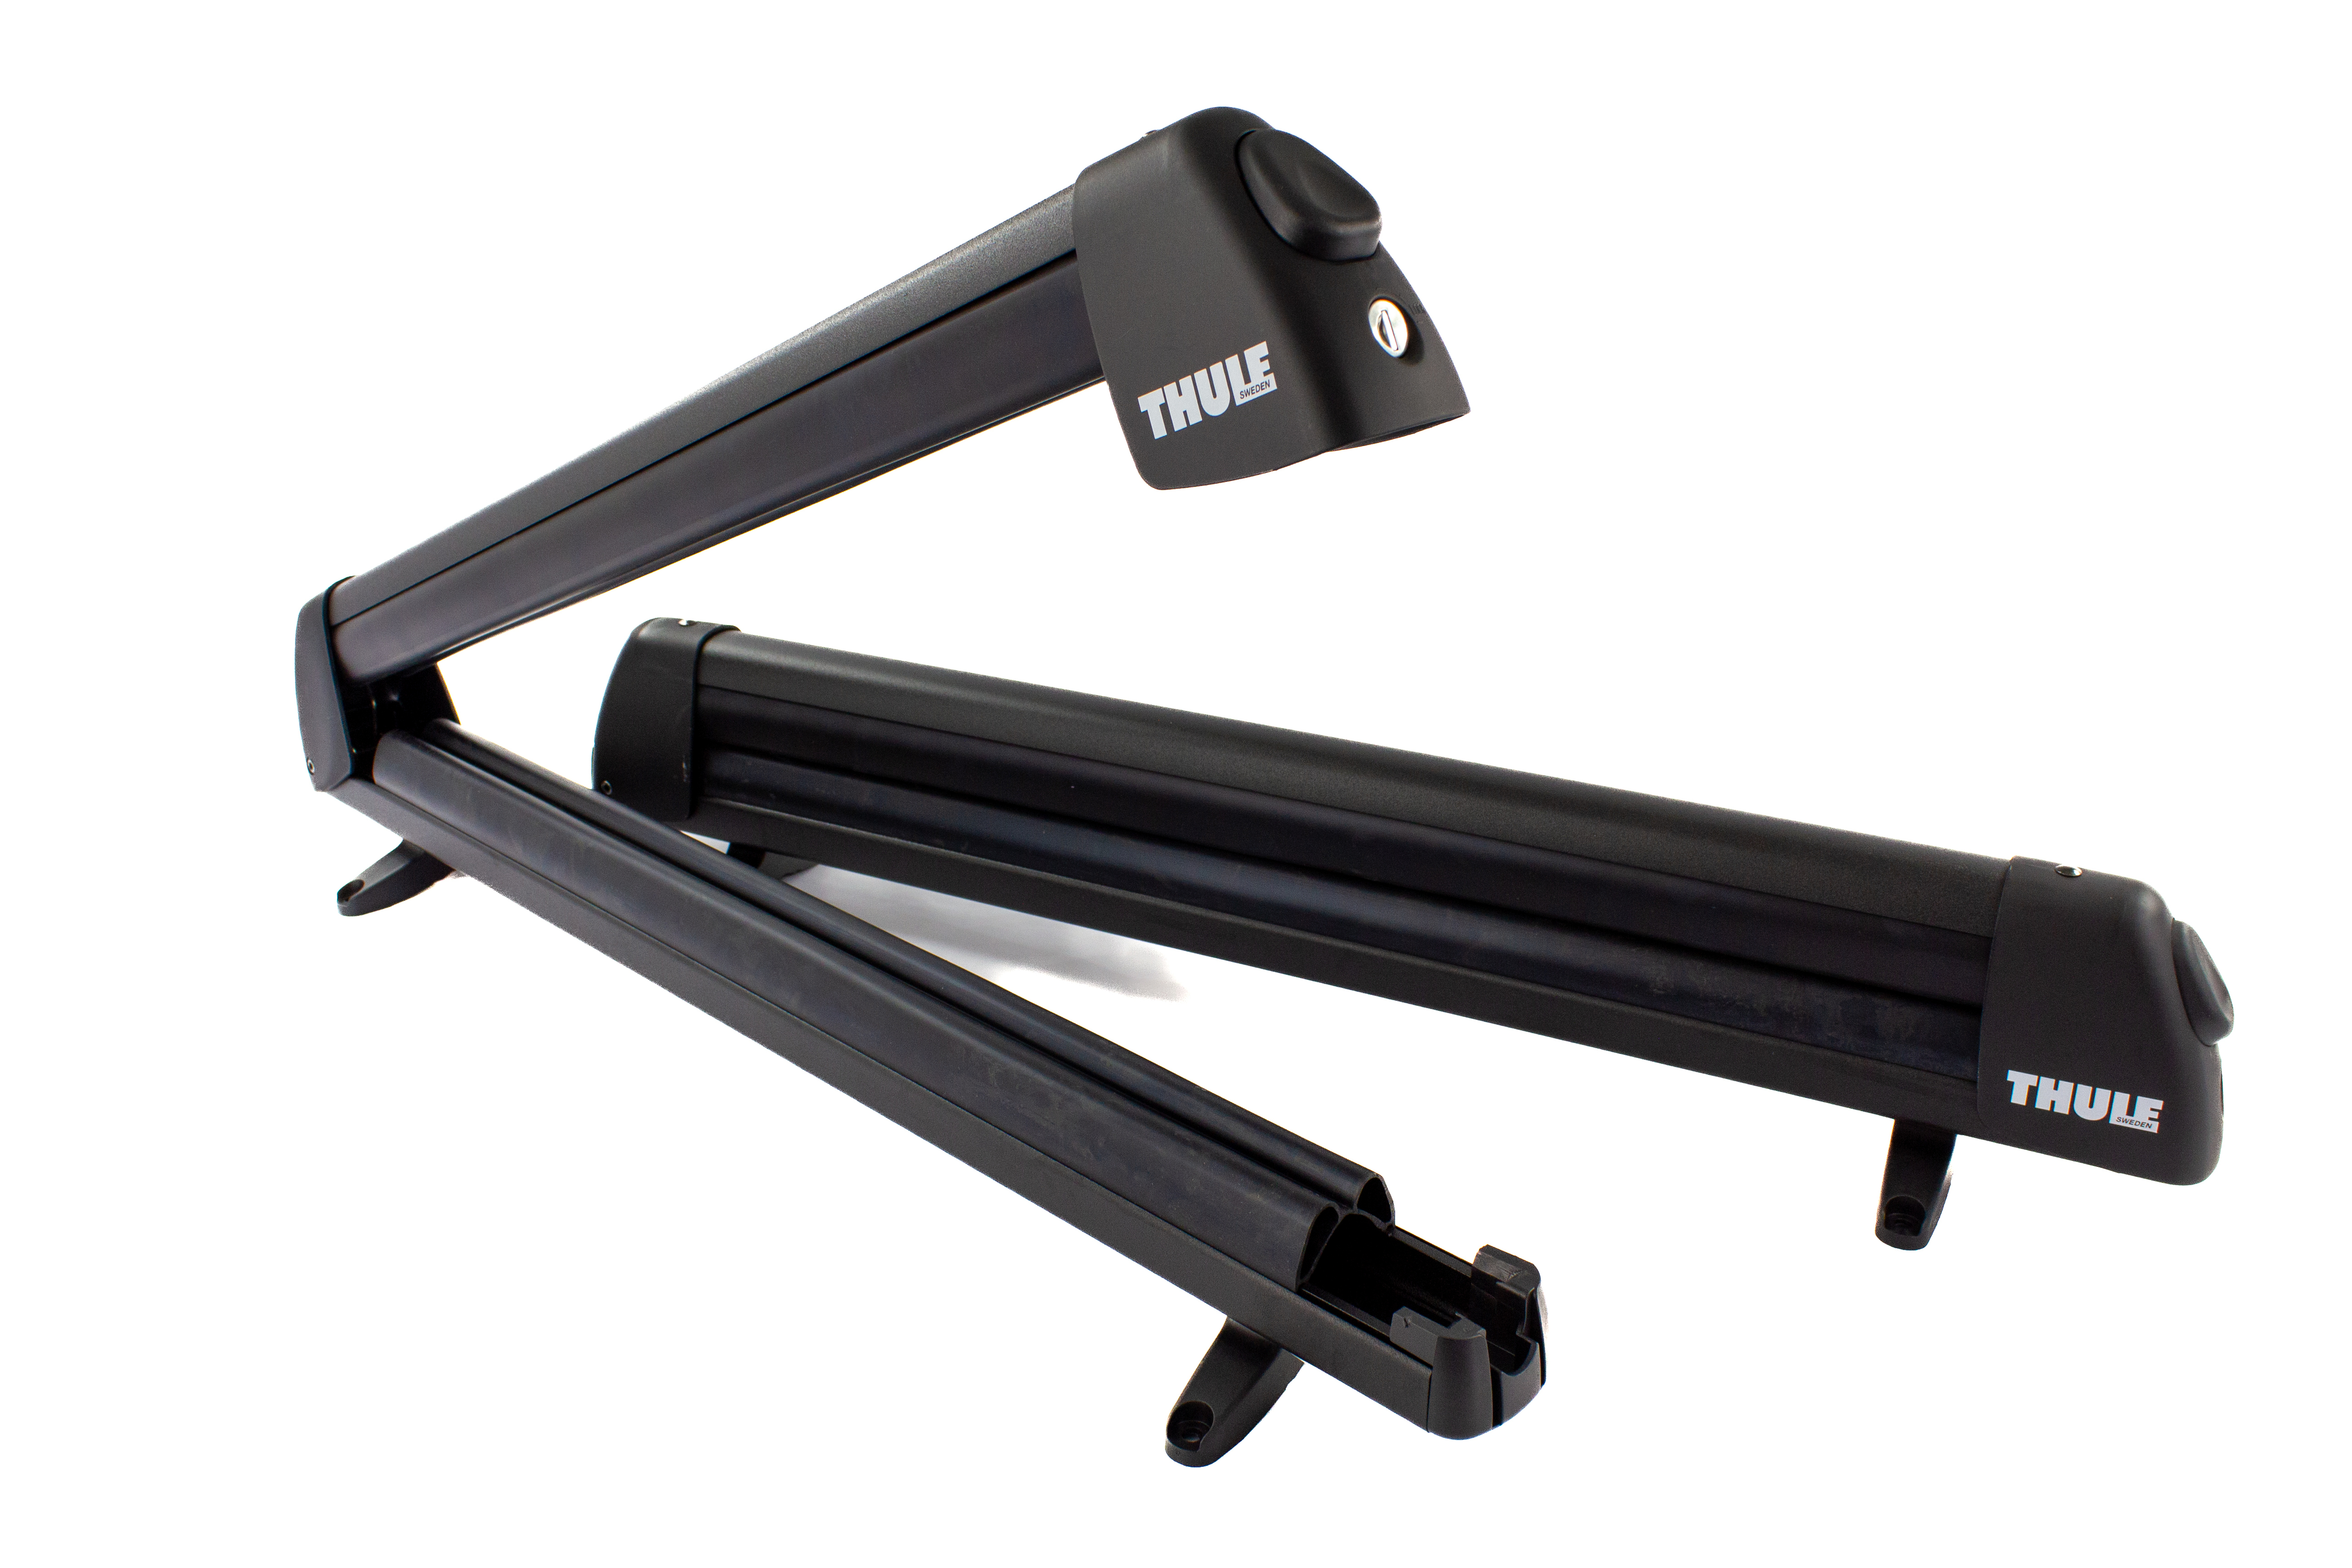 Thule 91725B Universal Flat Top 6-Ski Carrier Questions & Answers